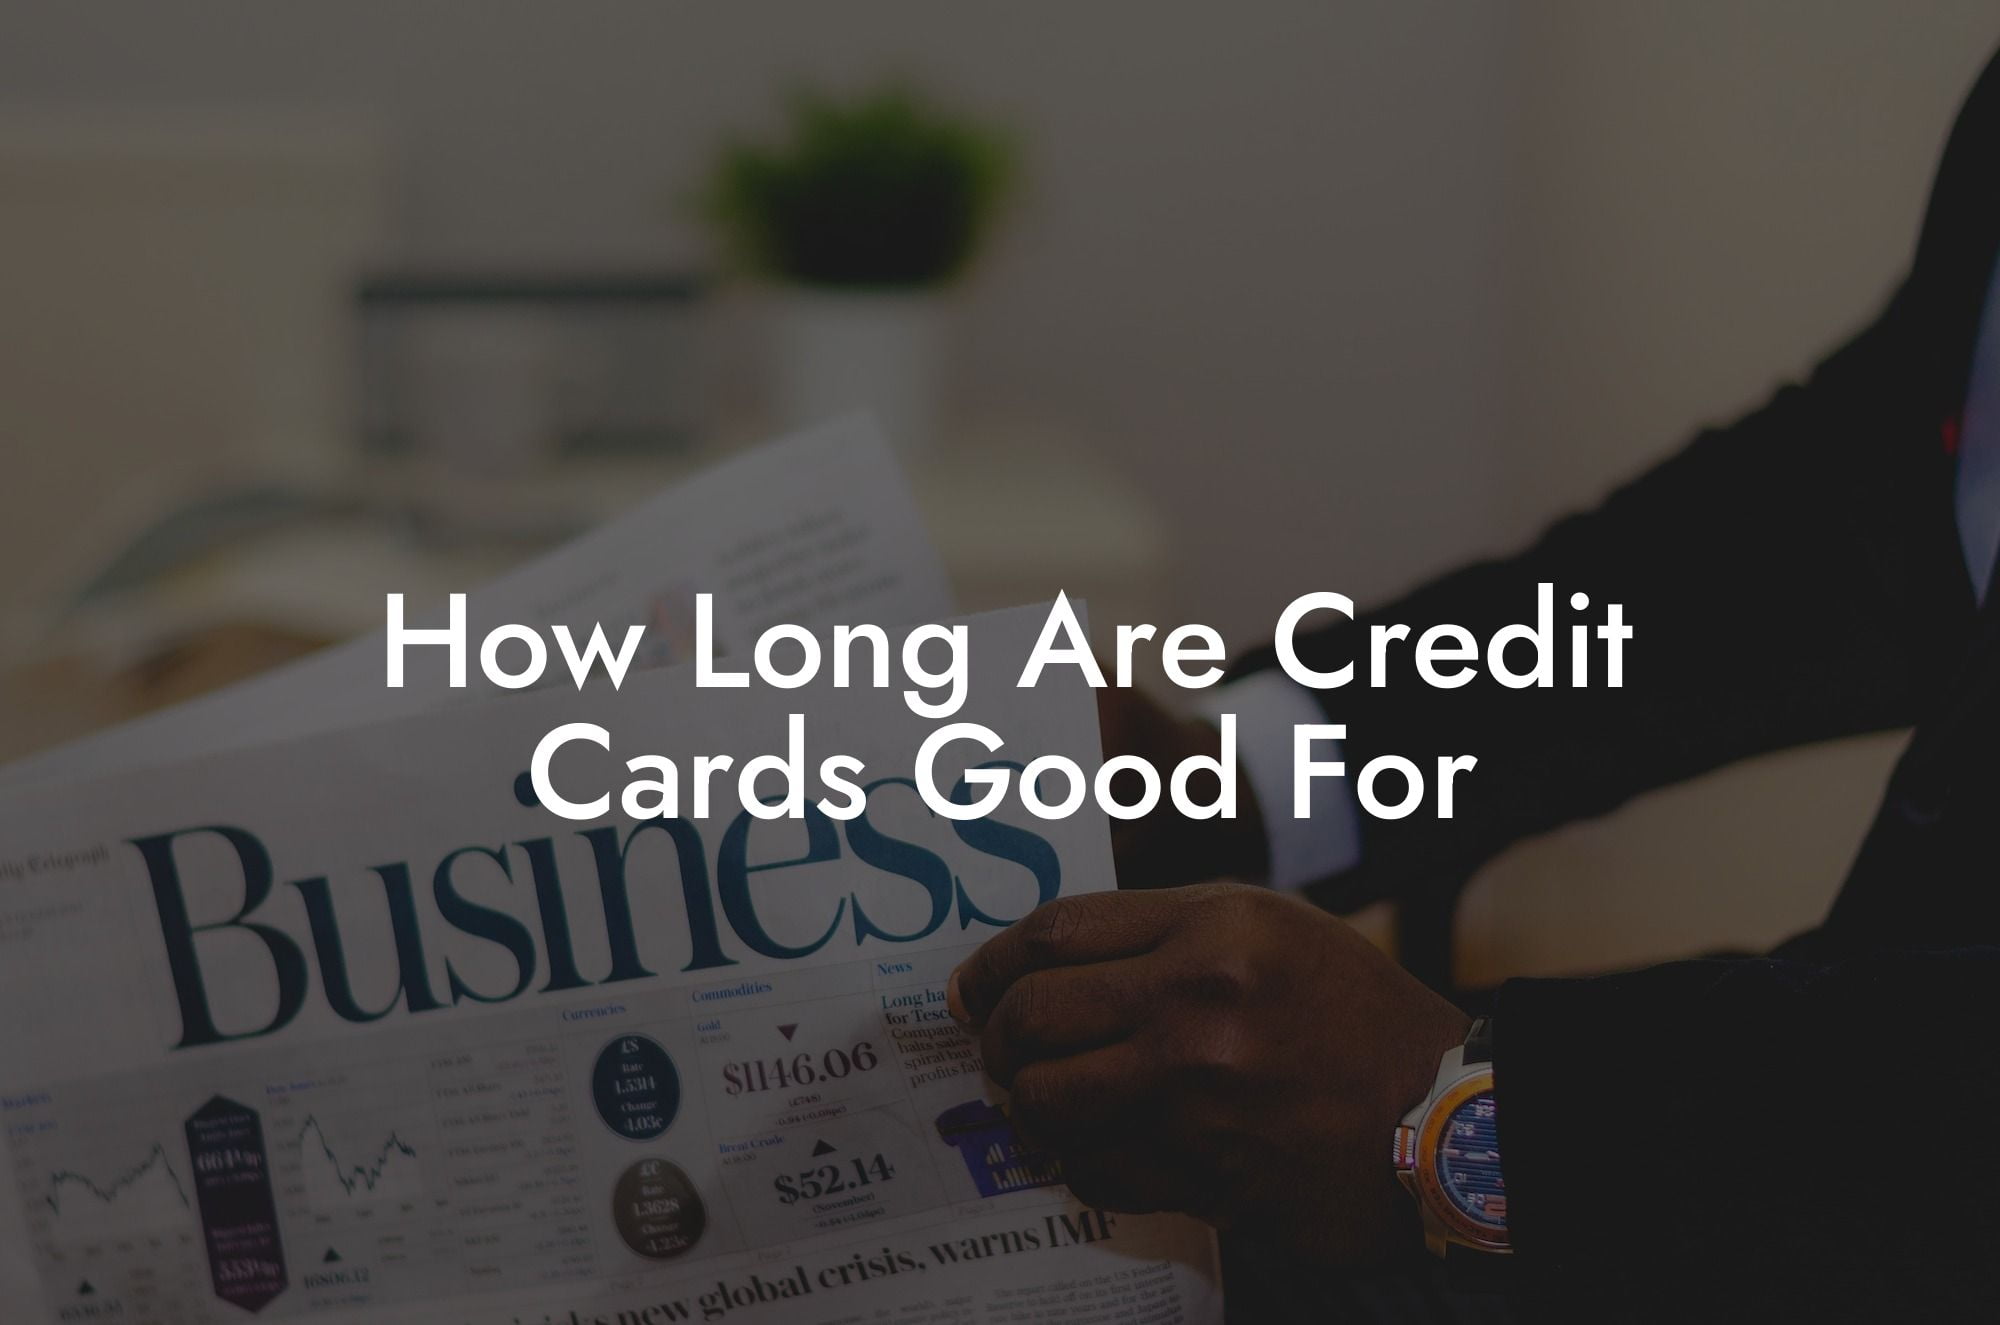 How Long Are Credit Cards Good For